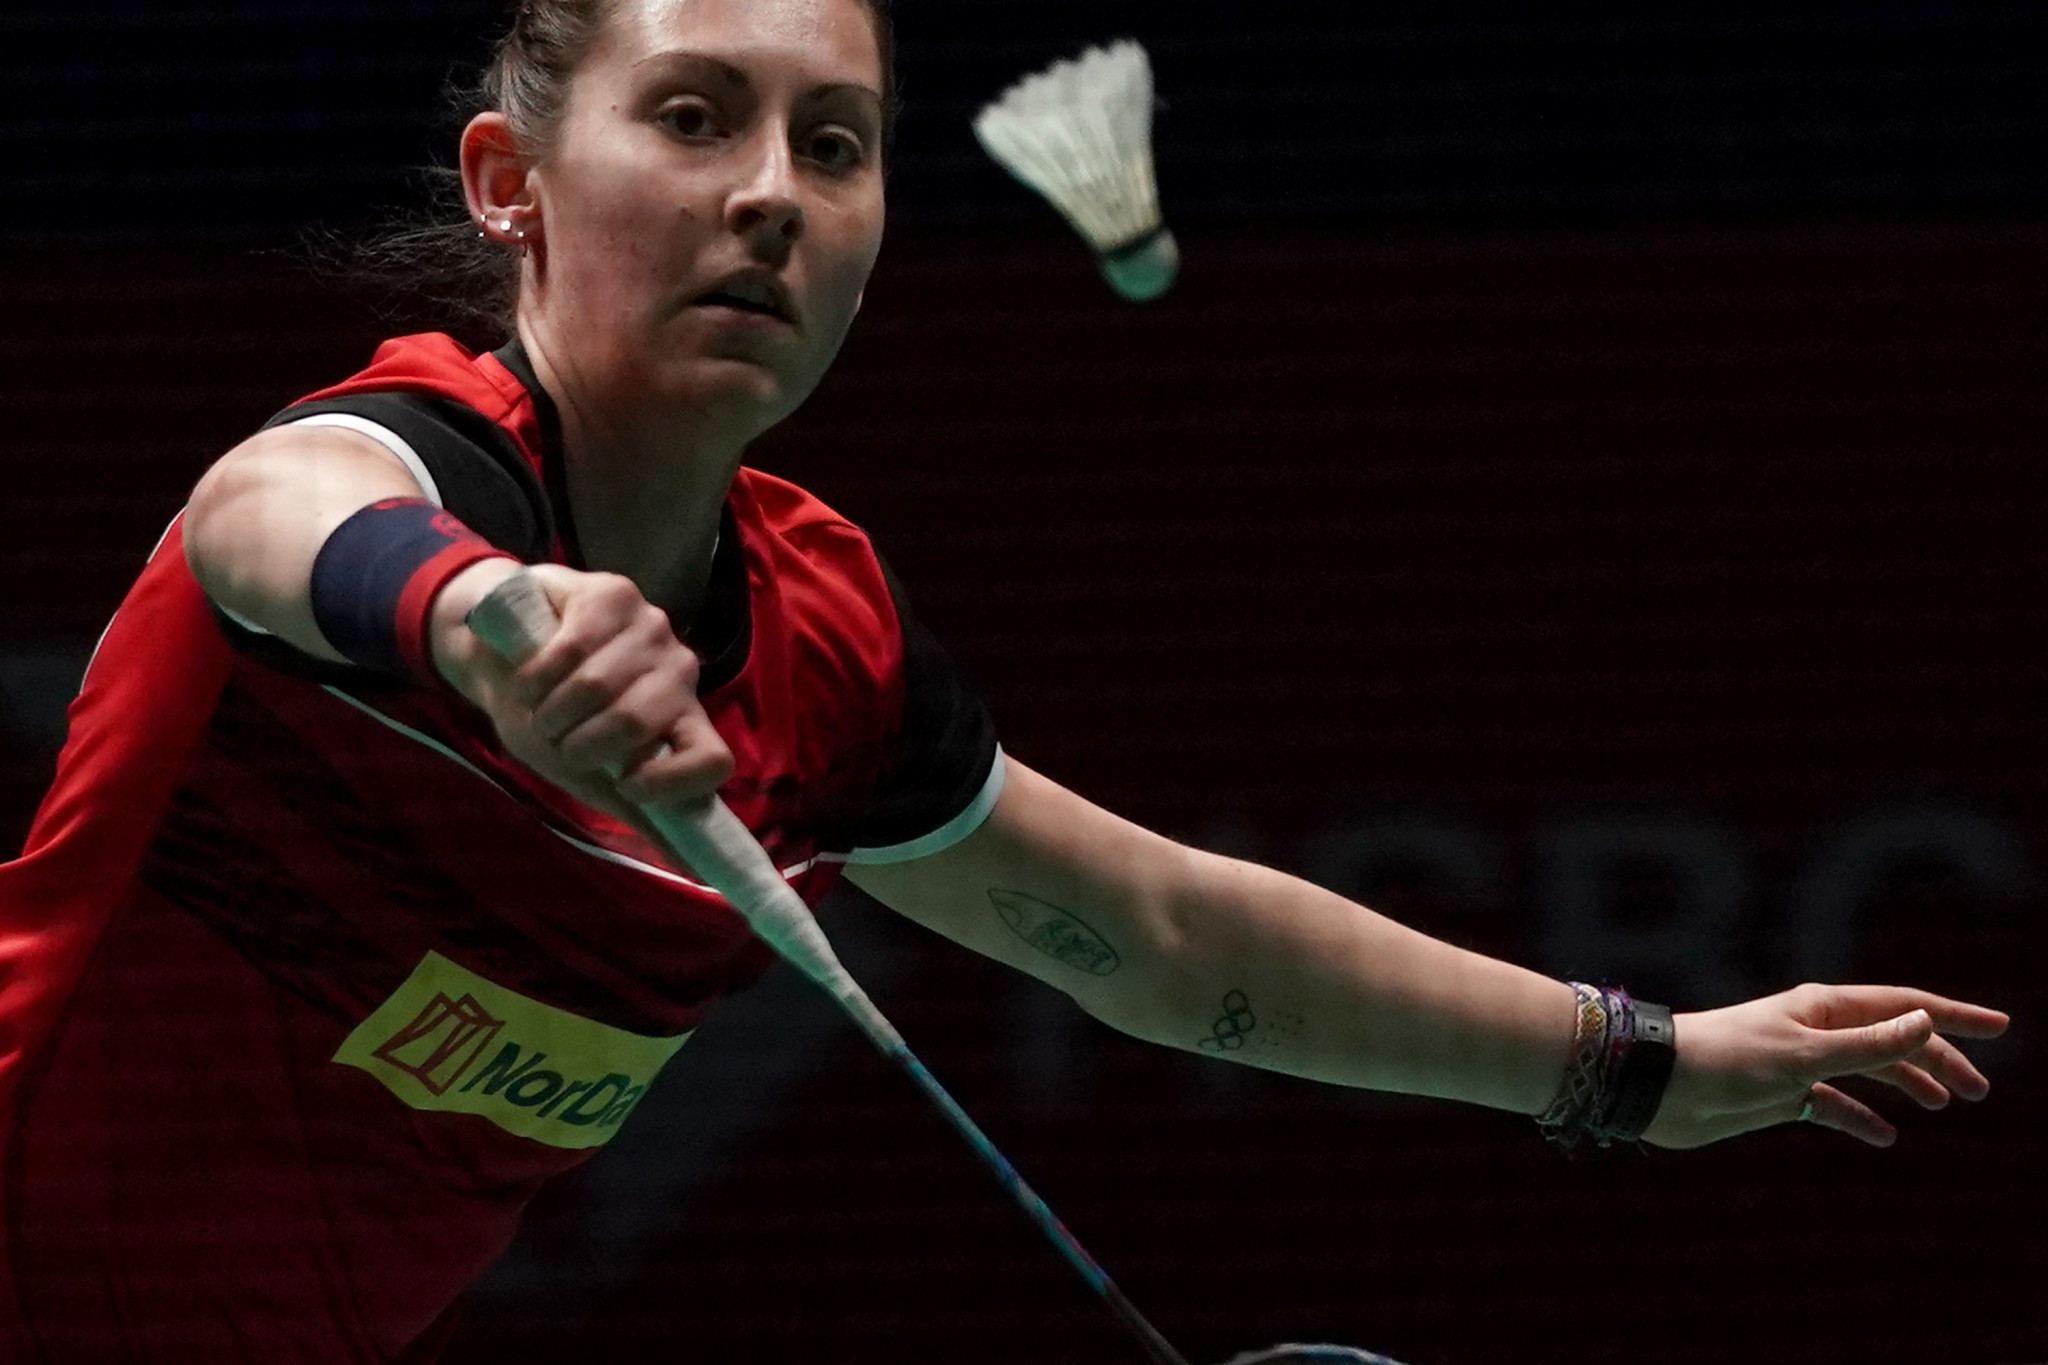 Top seed Kirsty Gilmour of Scotland beat India’s Rituparna Das in three games today to book her place in the semi-finals of the women’s singles event at the BWF Russian Open in Vladivostok ©Getty Images